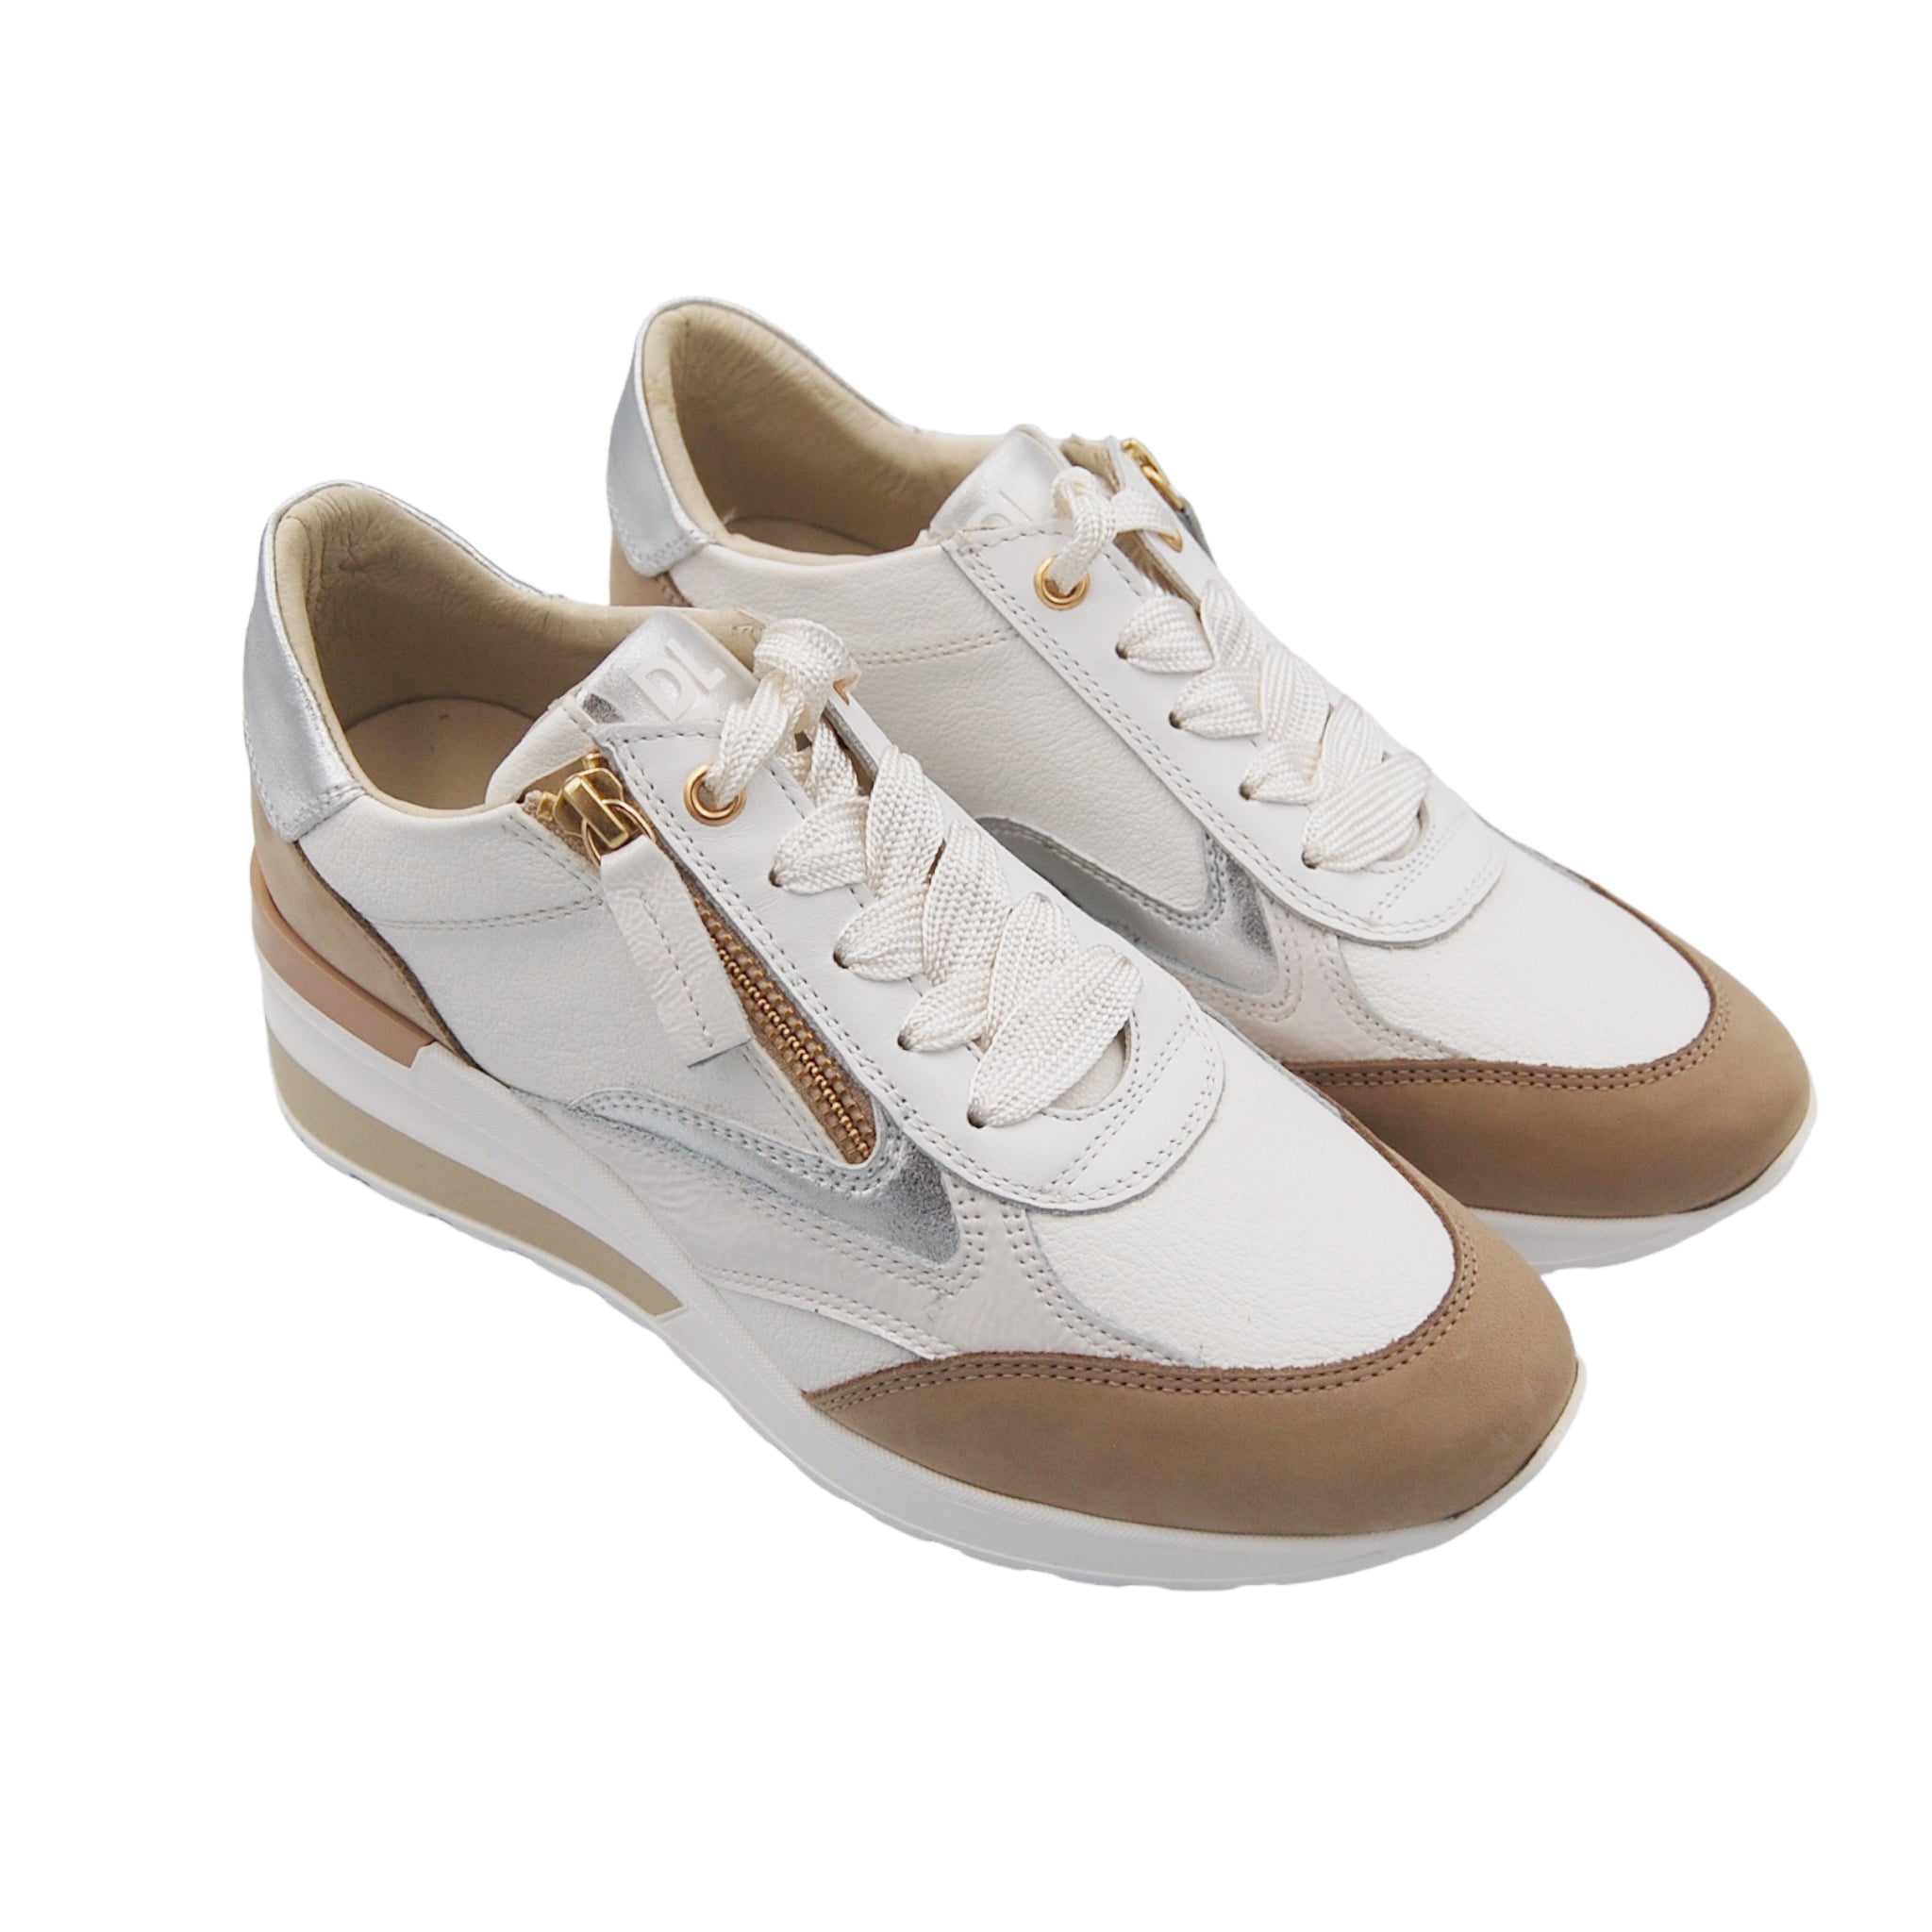 DL Sport Wedge Sneaker Taupe